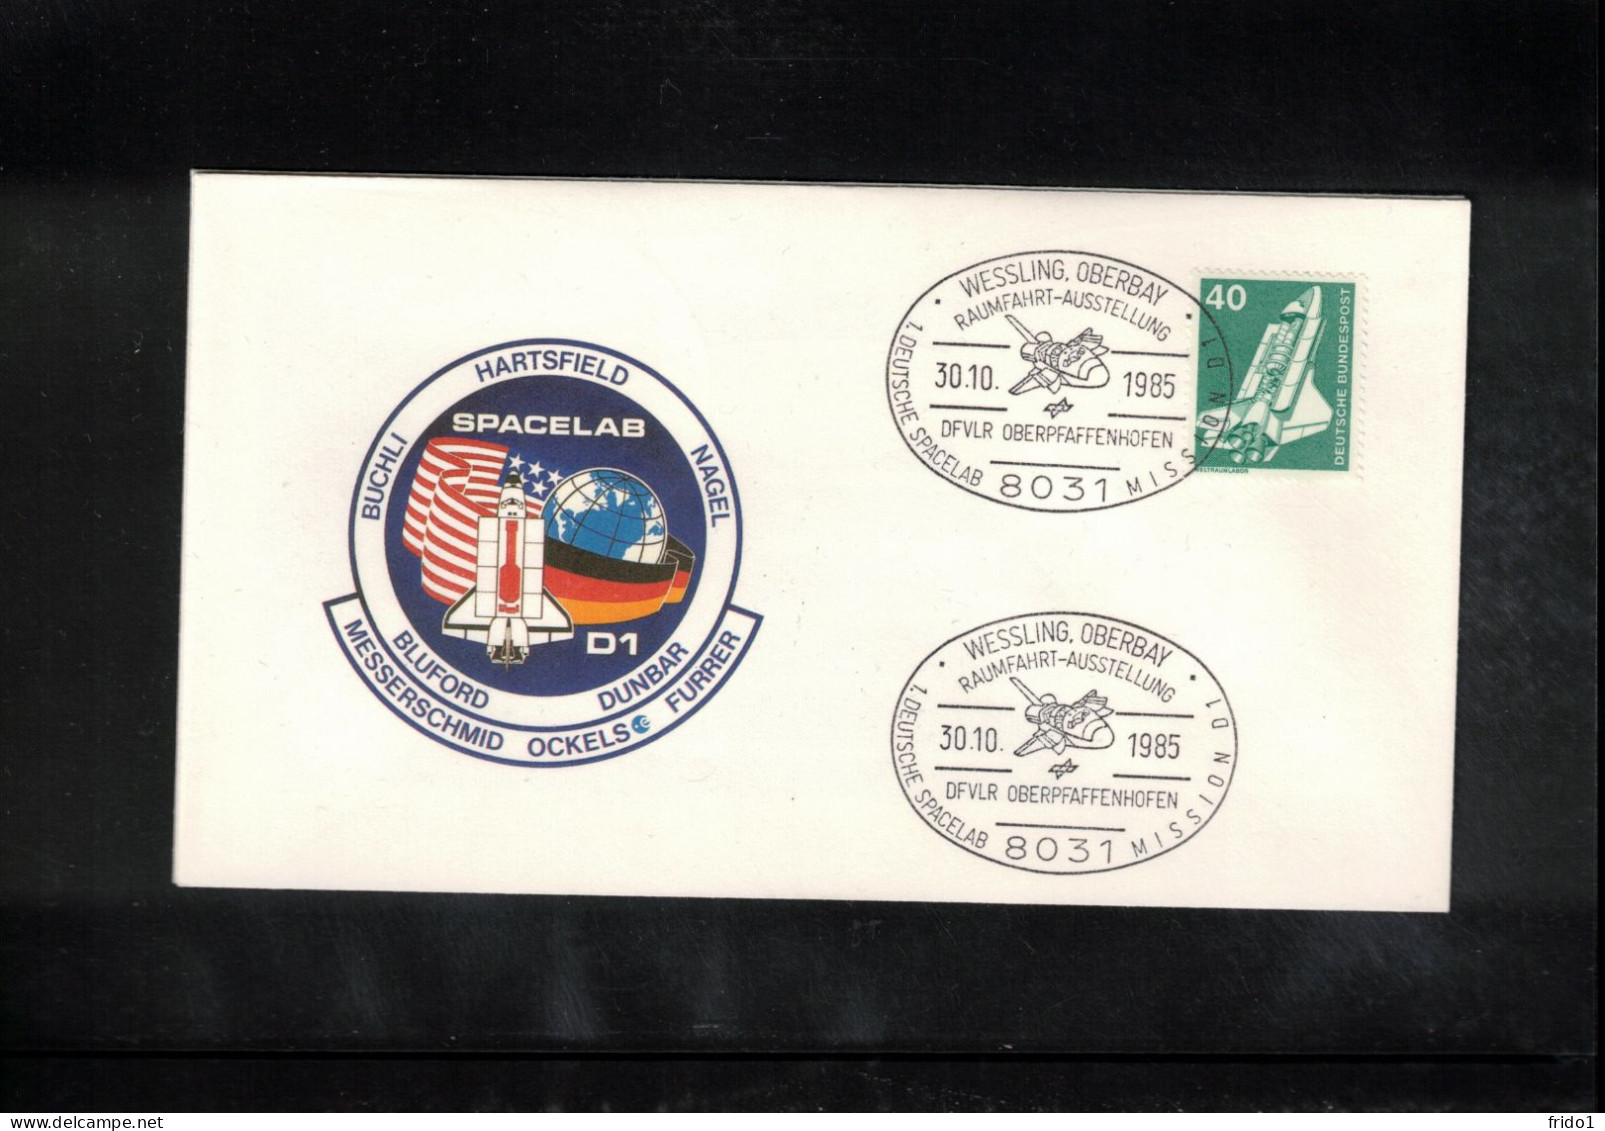 USA + Germany 1985 Space / Weltraum Space Shuttle + Spacelab D1 Interesting Cover - United States